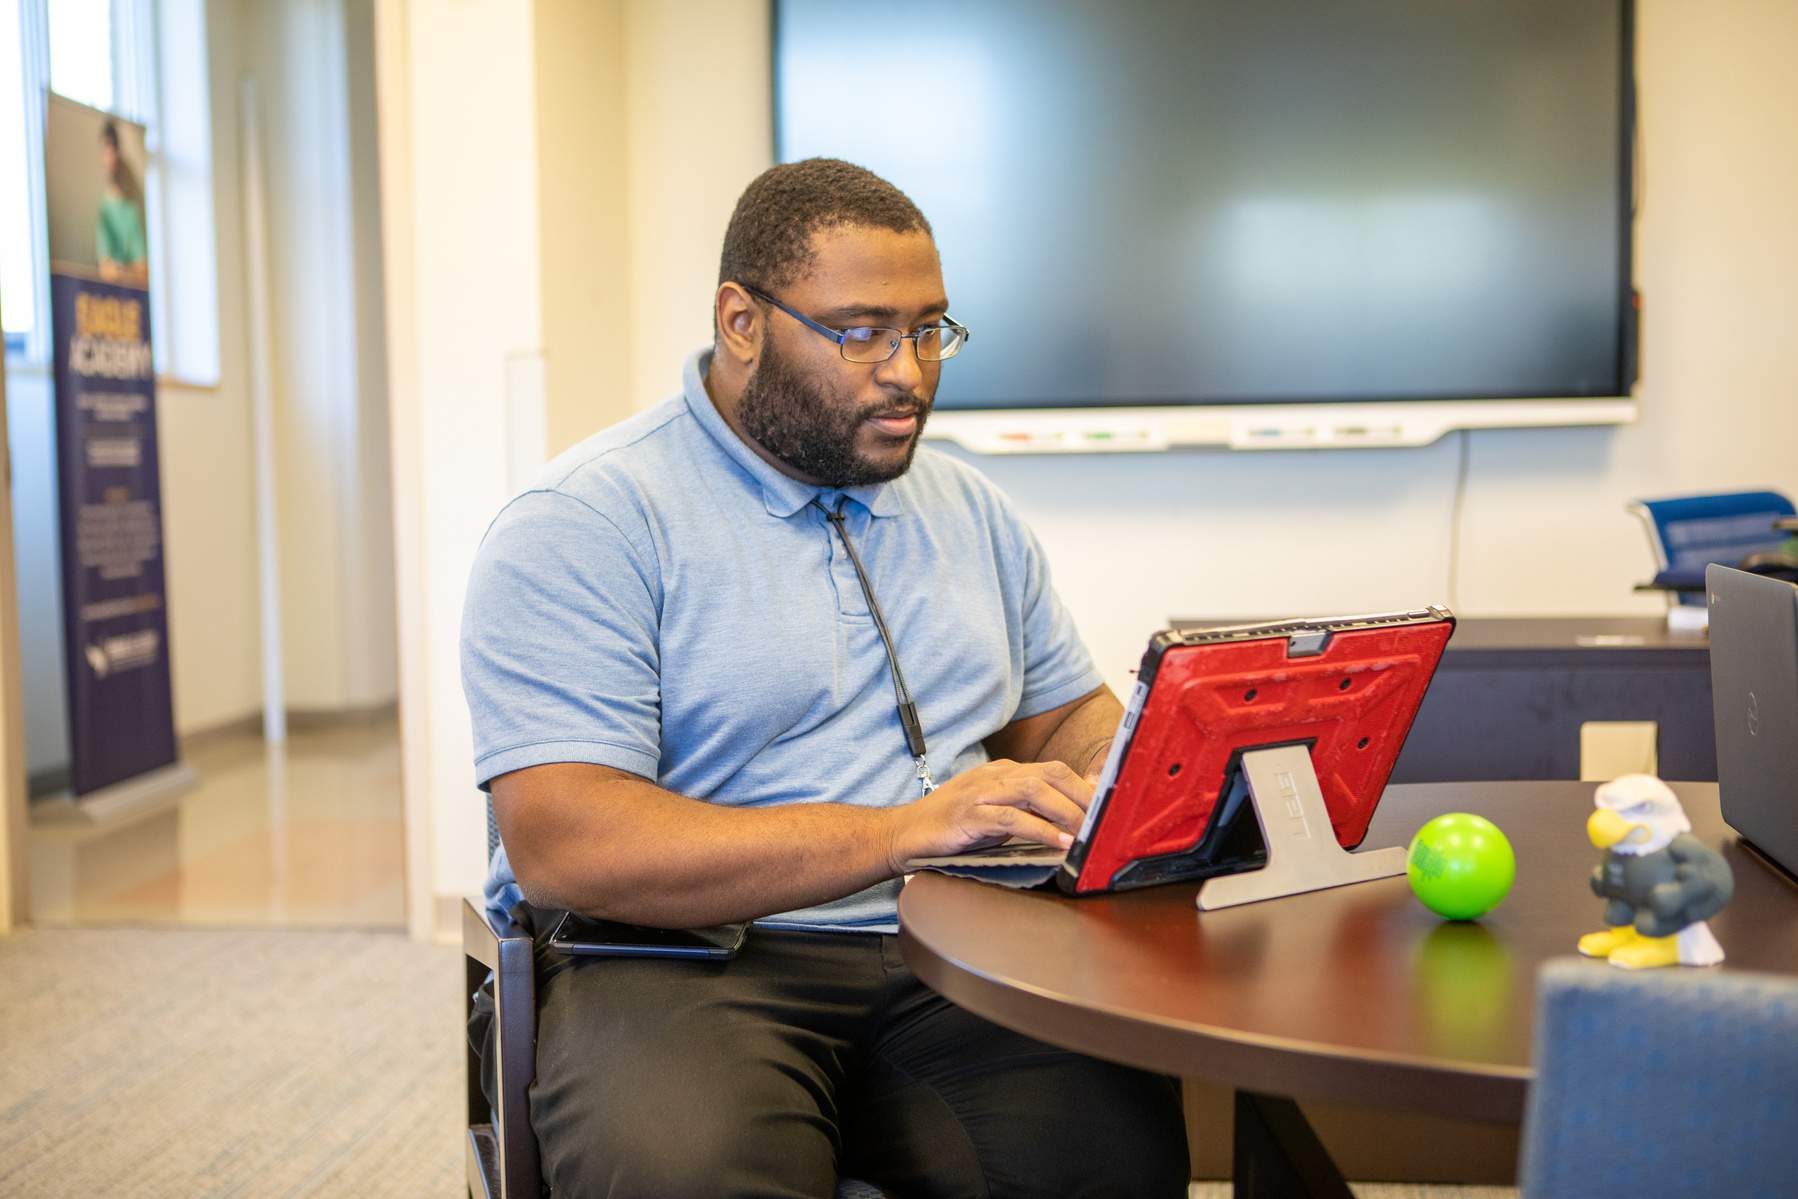 A young black male wears a blue shirt and glasses as he sits at a table and works on a computer. 